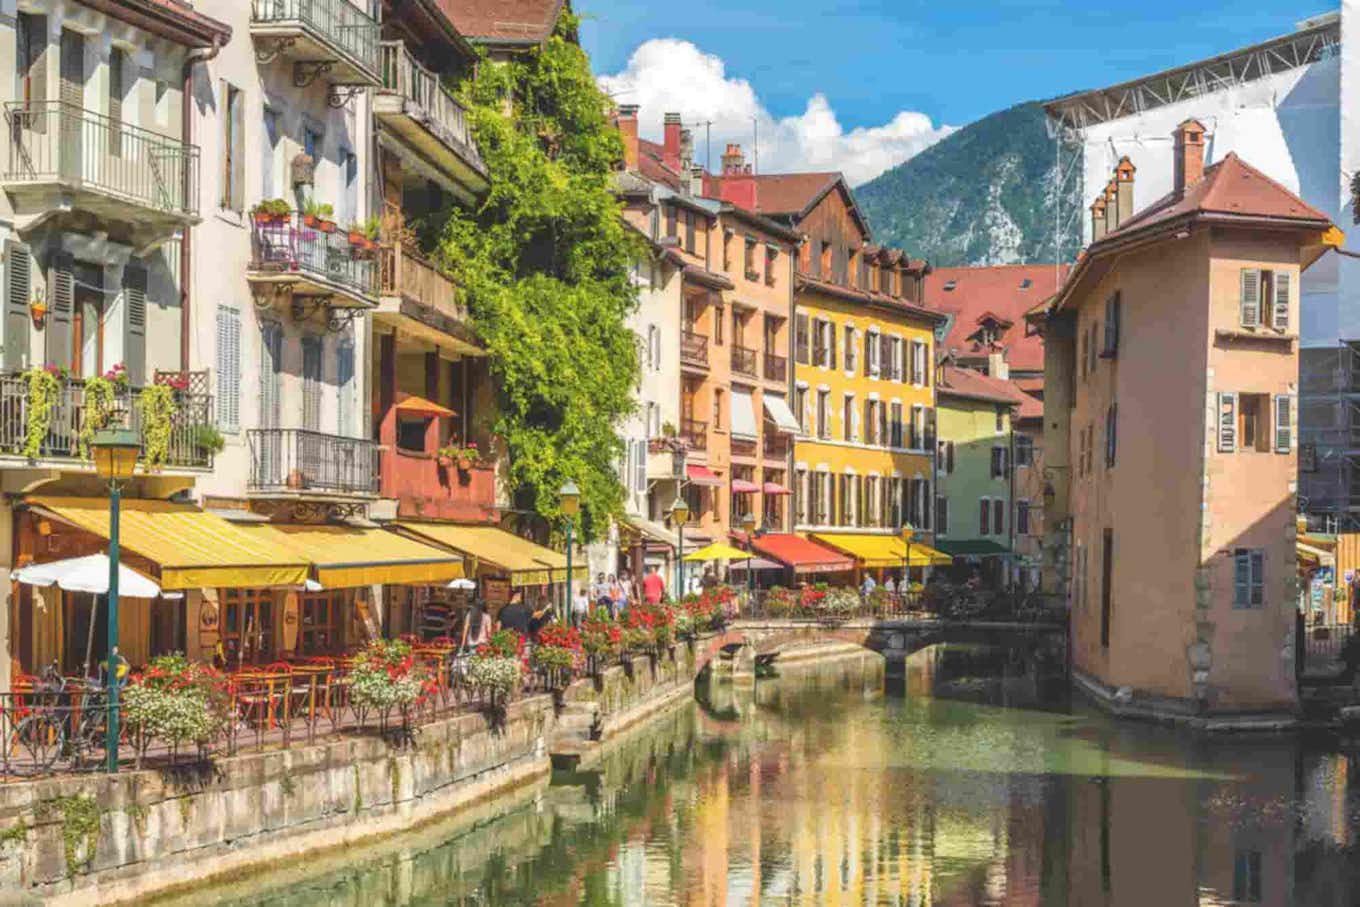 Colorful houses in Annecy, a South East France Road Trip destination